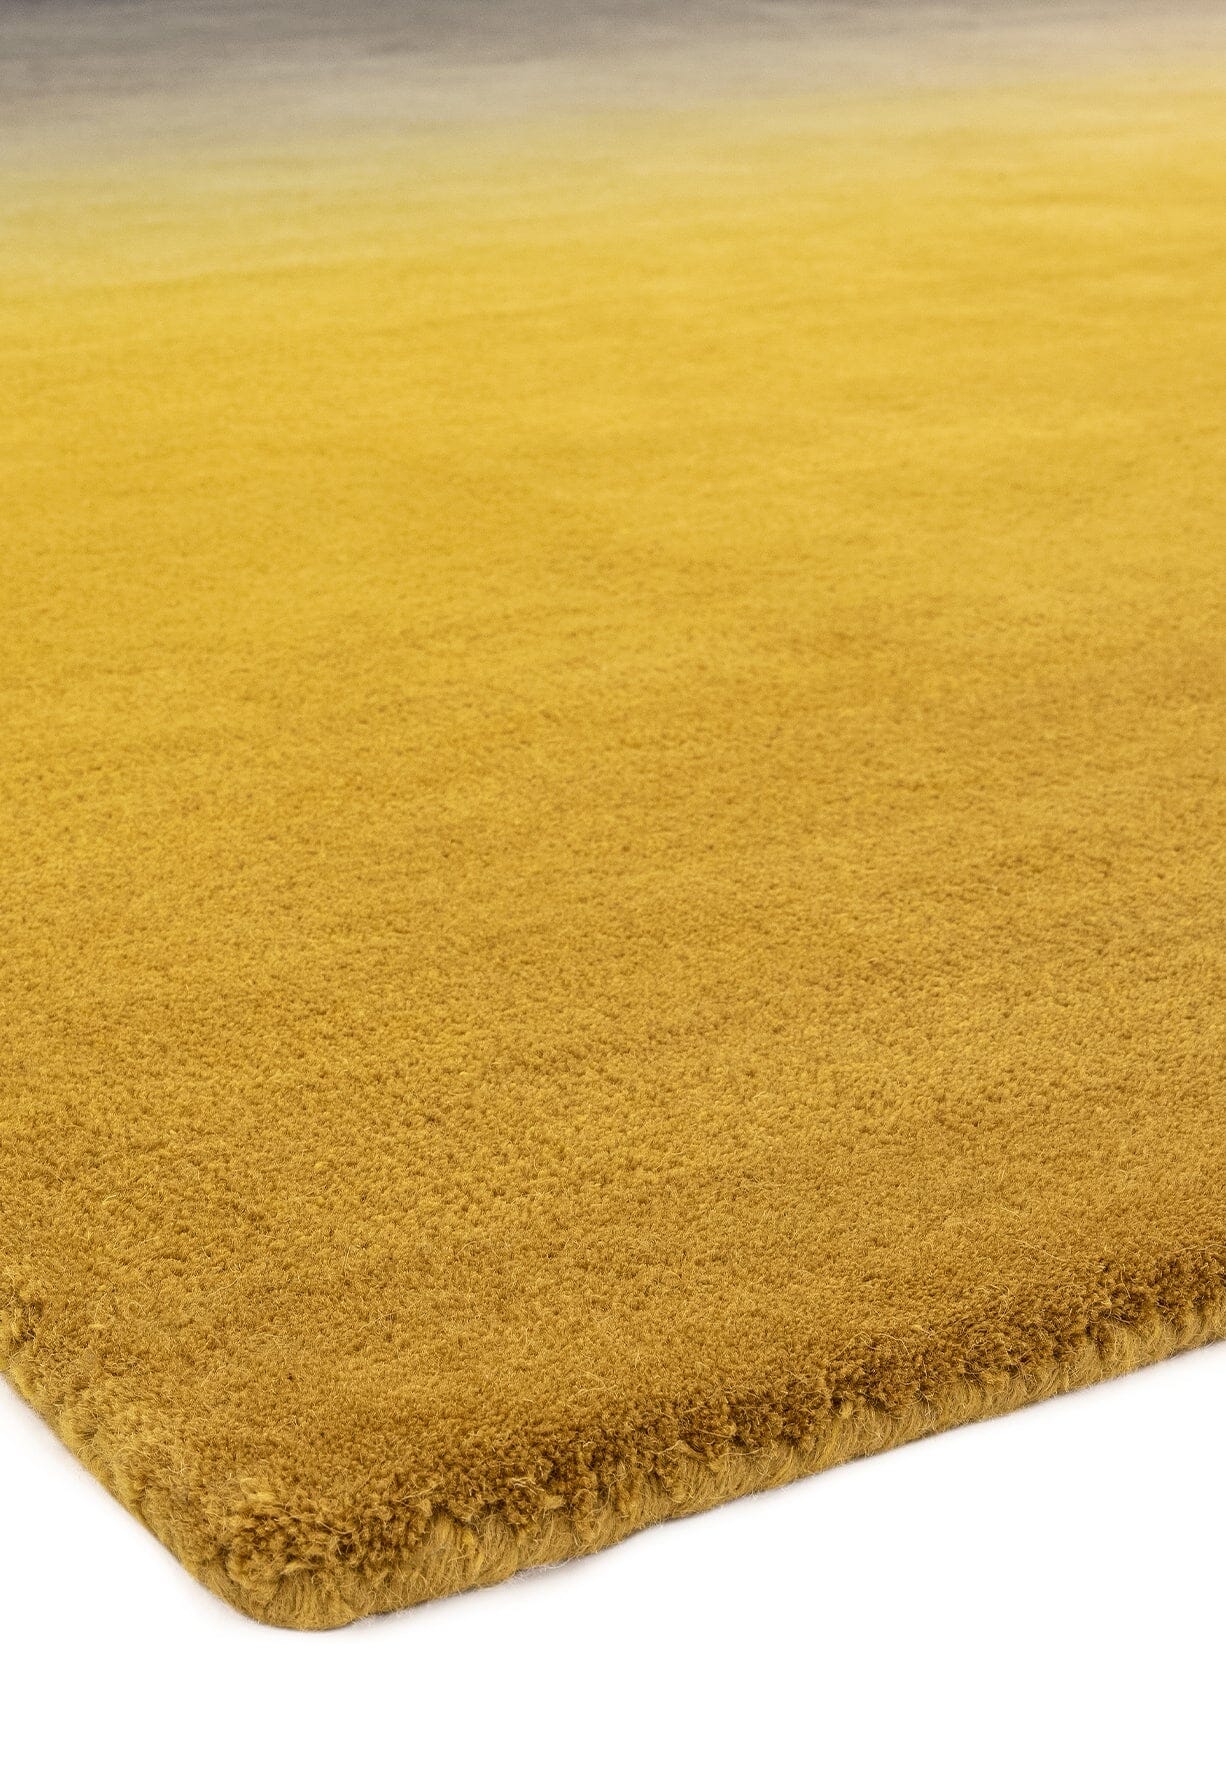  Asiatic Carpets-Asiatic Carpets Ombre Hand Tufted Rug Mustard - 120 x 170cm-Yellow, Gold 949 